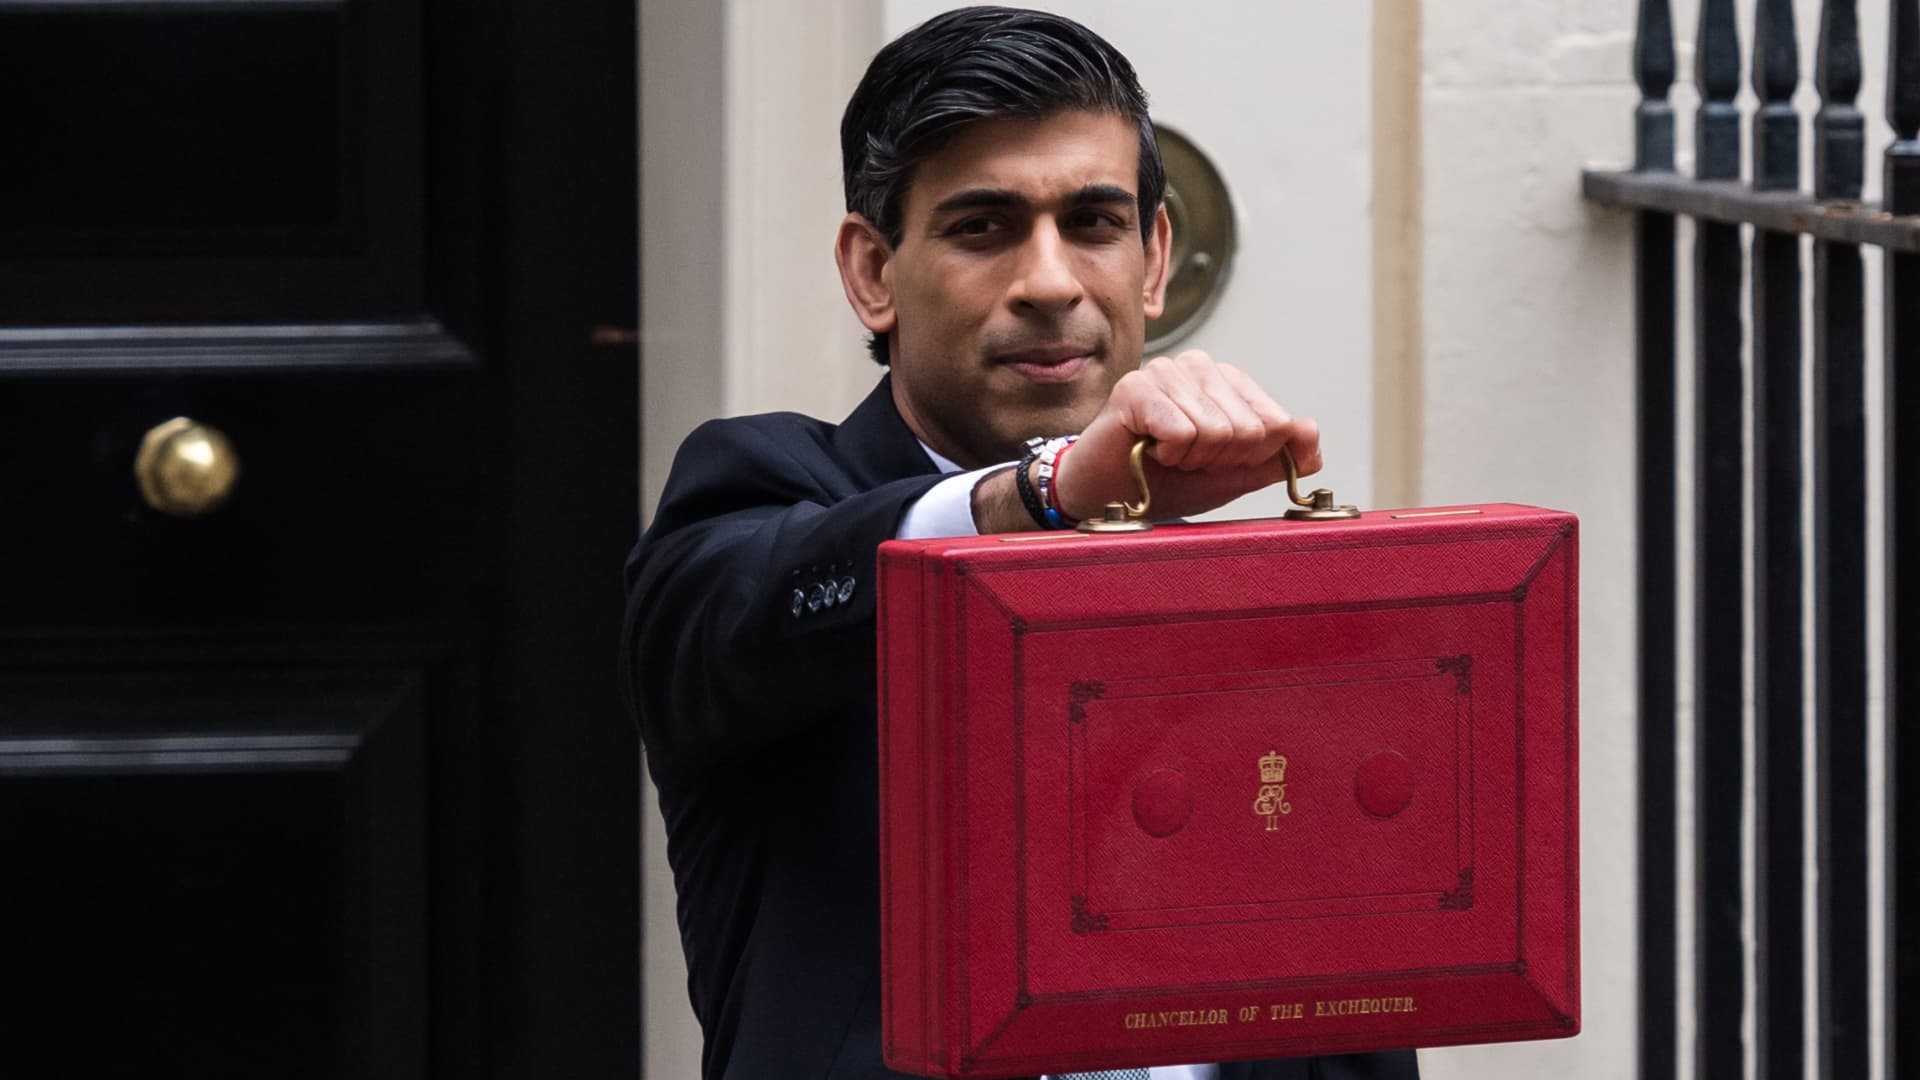 Chancellor of the Exchequer Rishi Sunak holds the Budget box outside 11 Downing Street in central London ahead of the announcement of the Spring Statement in the House of Commons on 03 March, 2021 in London, England.